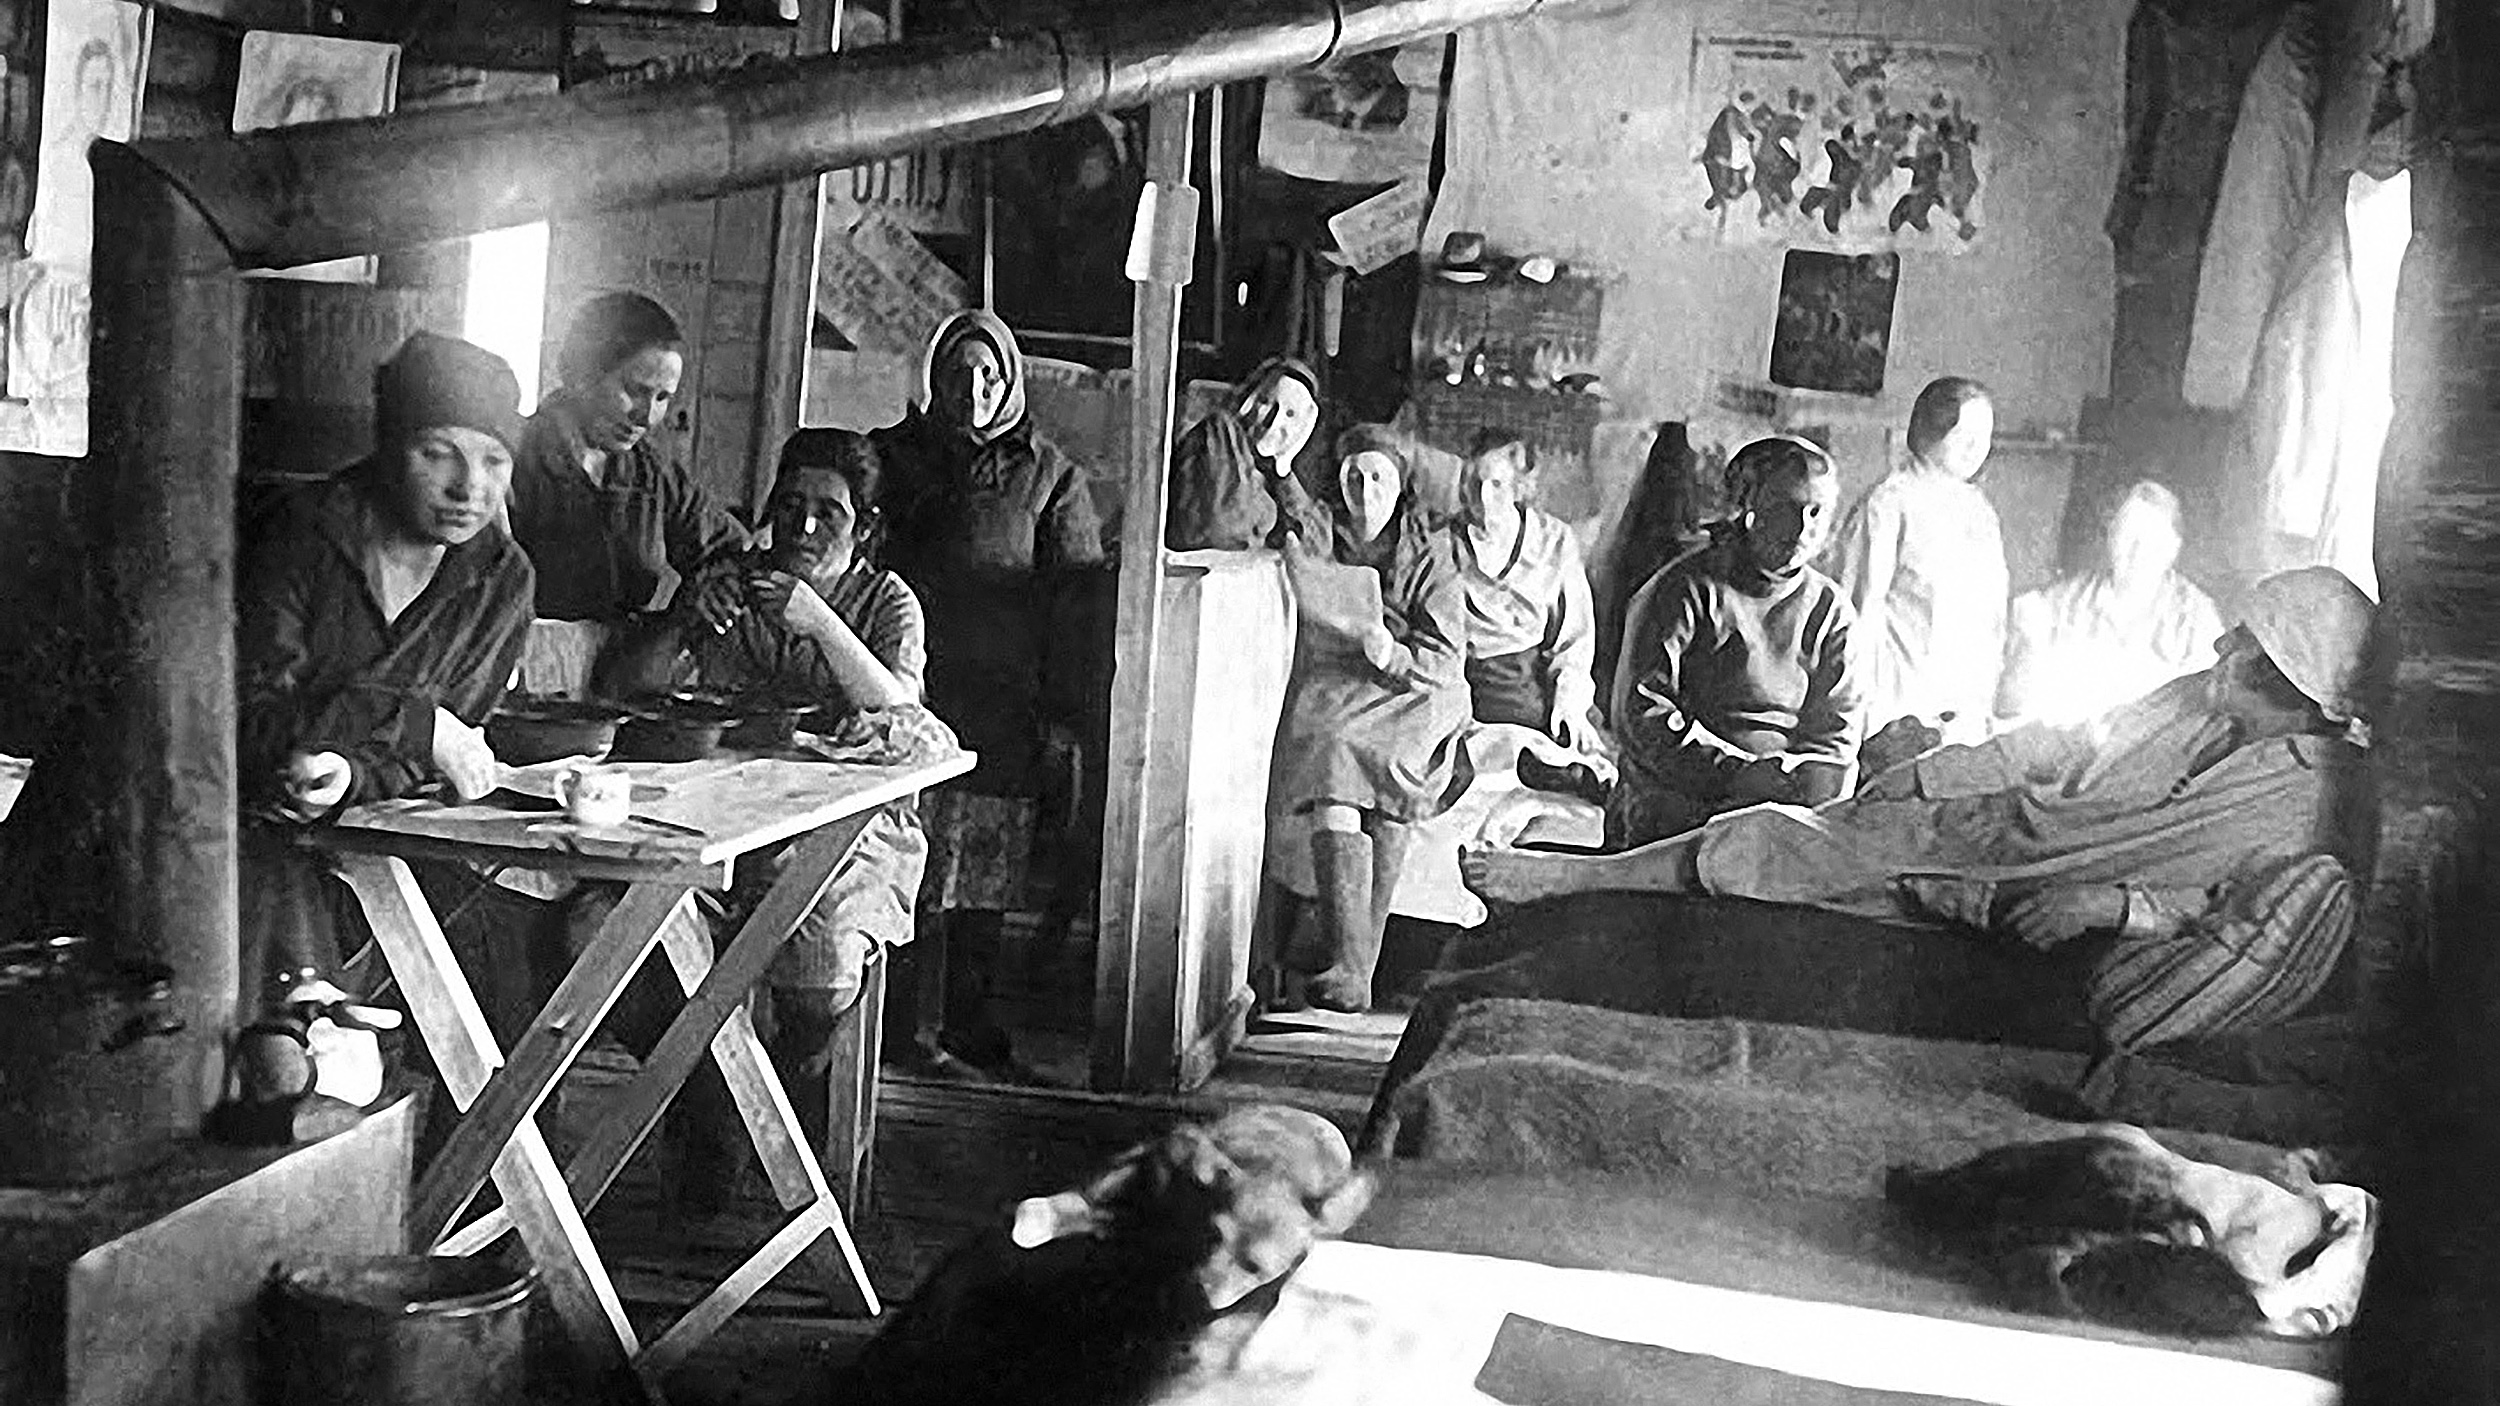 A group of people sitting around a table in a room, engaged in conversations amidst an air of exile.